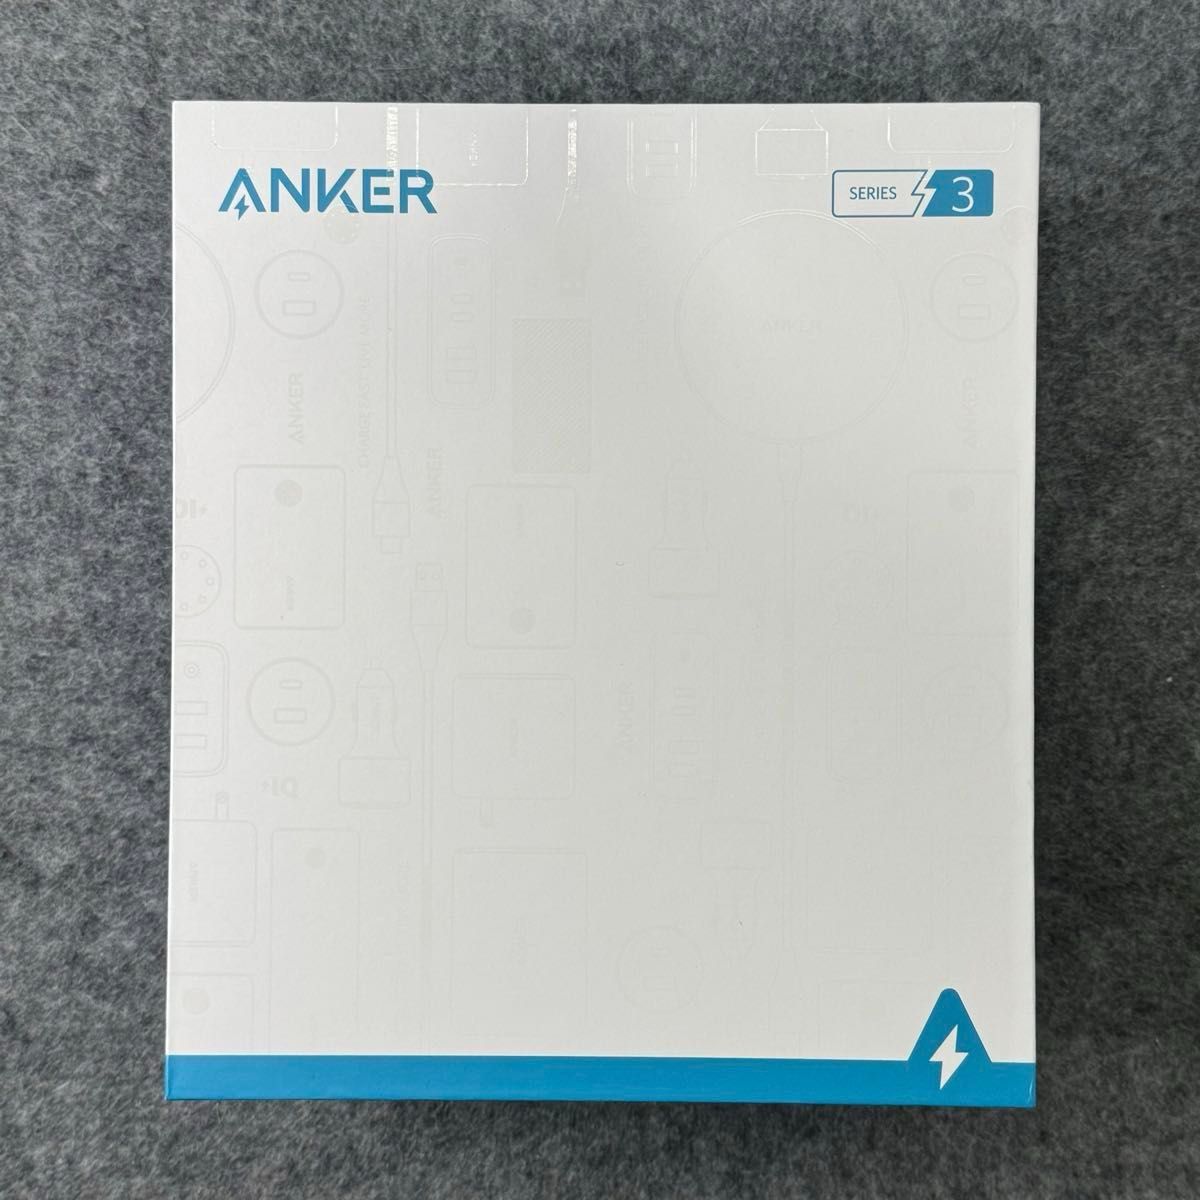 Anker PowerExpand 9-in-1 USB-C PD Dock ドッキングステーション